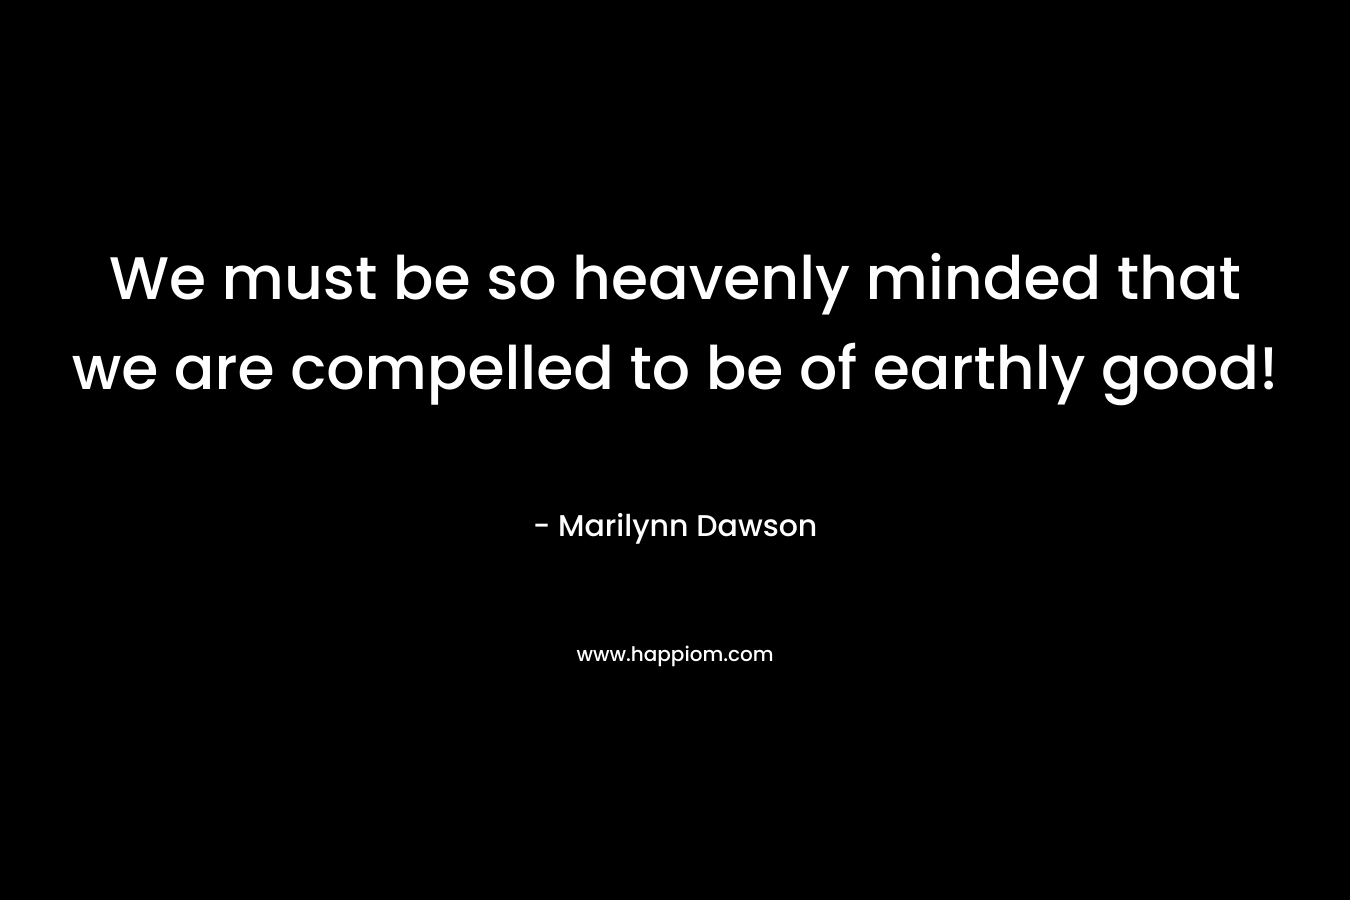 We must be so heavenly minded that we are compelled to be of earthly good!